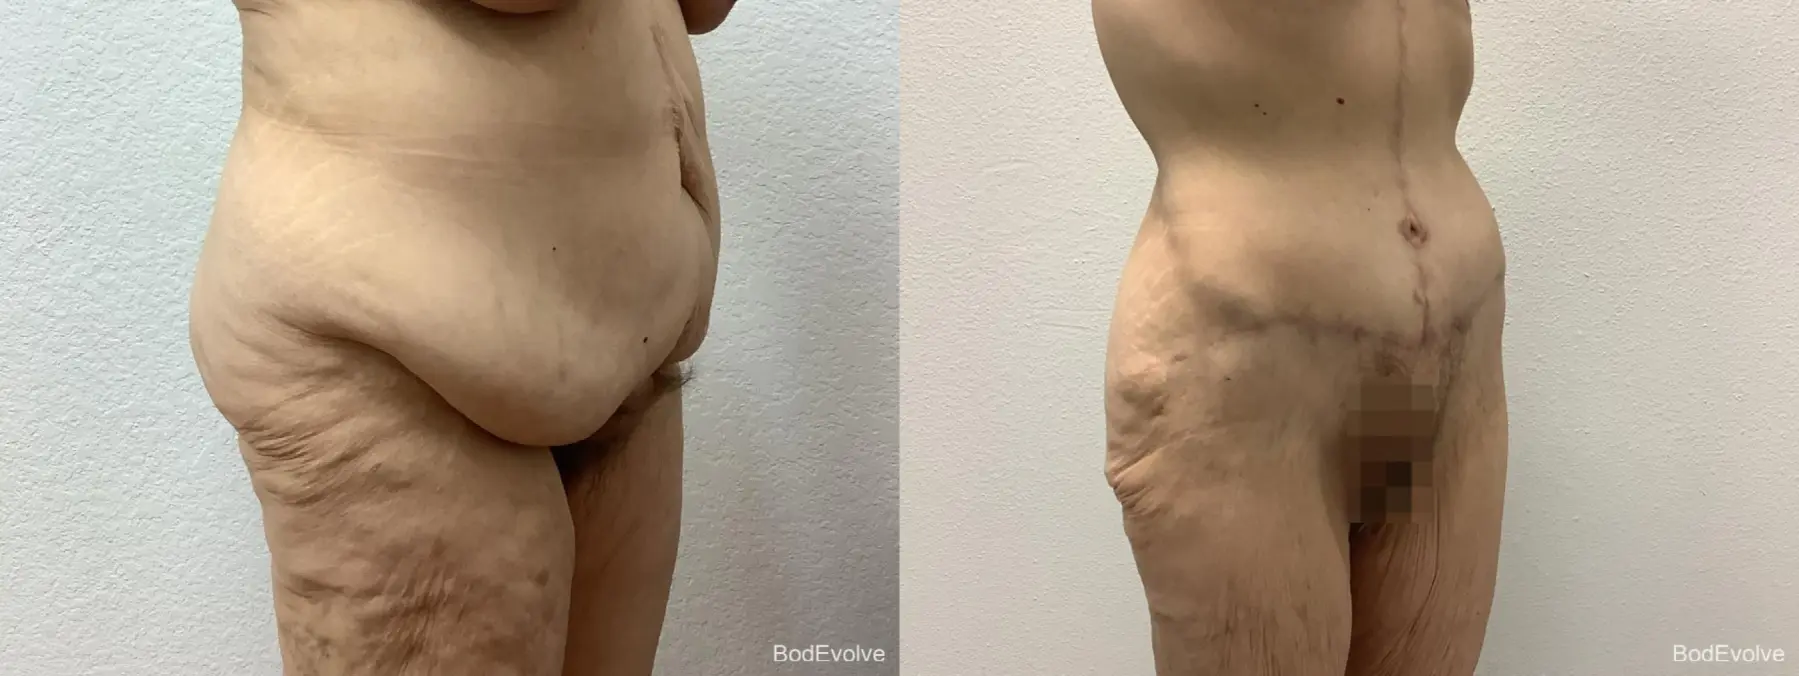 After Massive Weight Loss: Patient 5 - Before and After 4